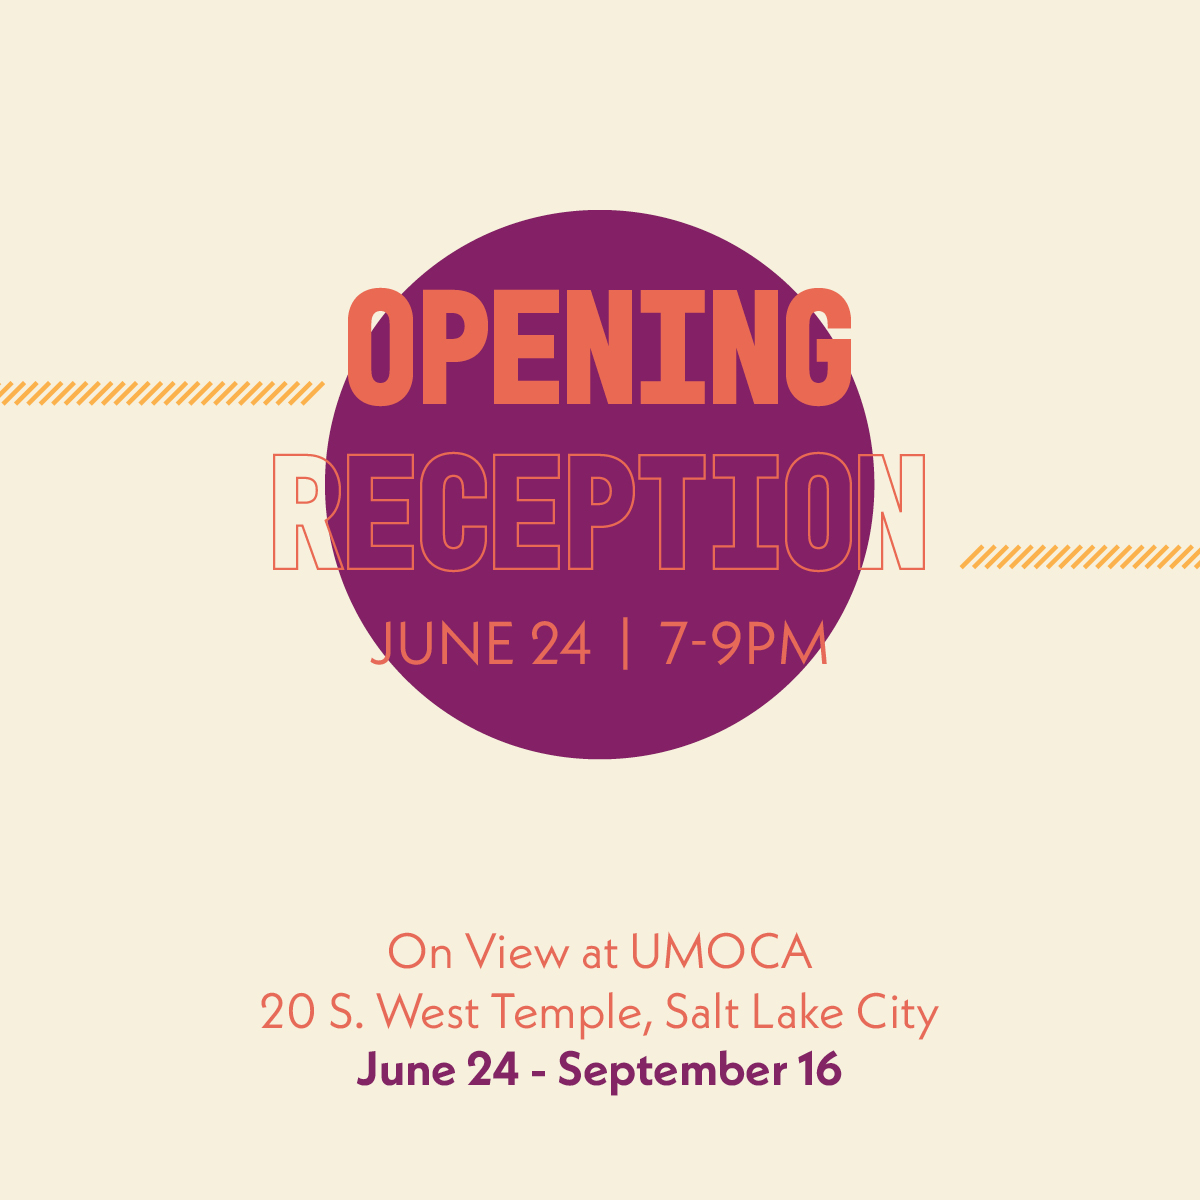 Opening Reception June 24, 7 to 9 p.m. On view at UMOCA, 20 South West Temple, Salt Lake City. June 24 through September 16.